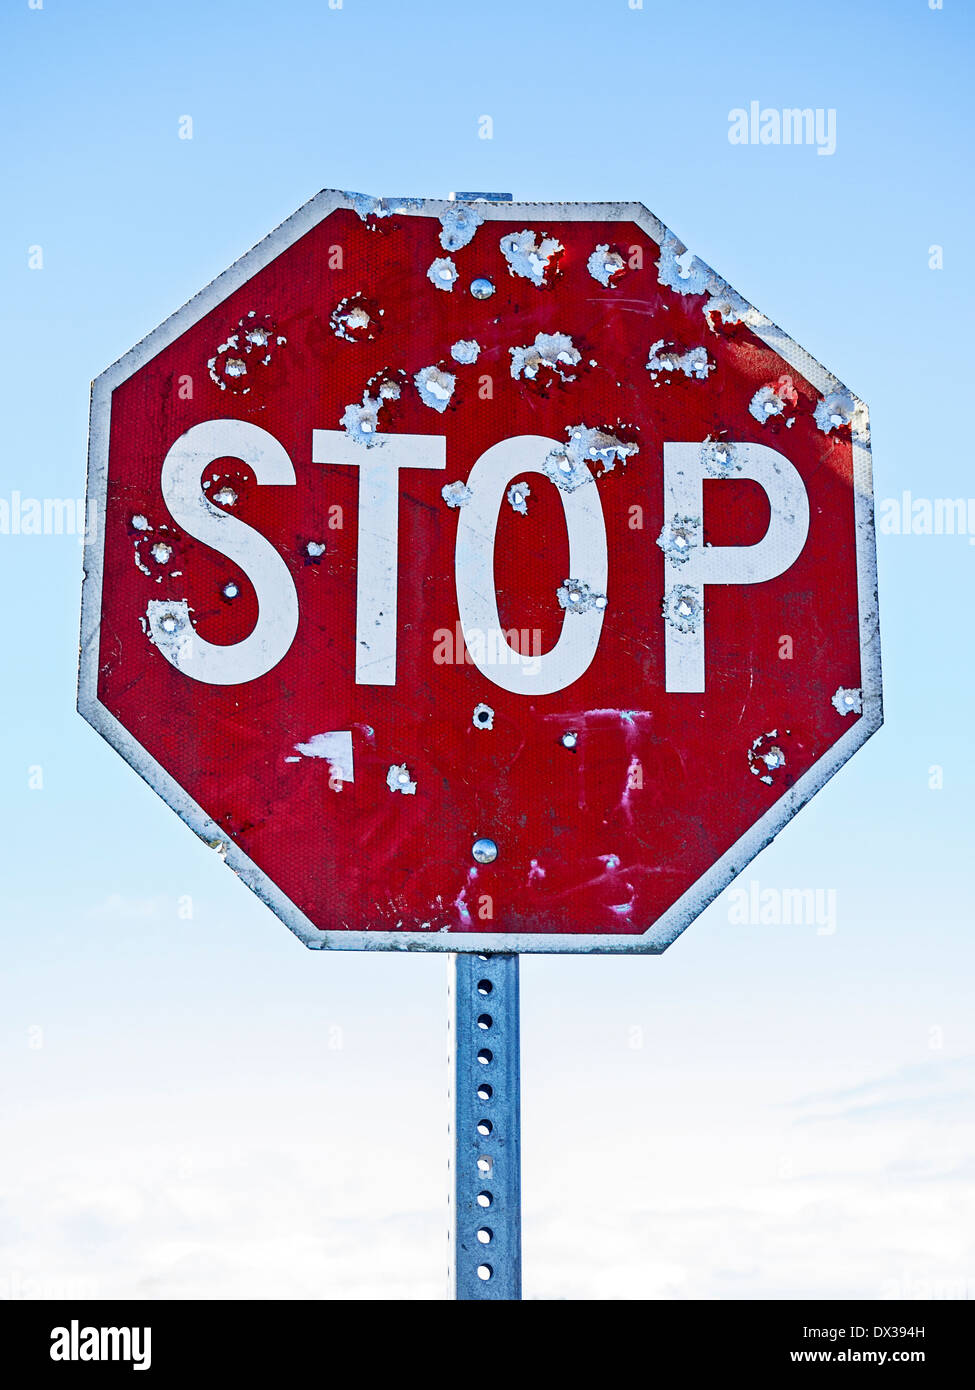 stop-sign-with-bullet-holes-DX394H.jpg